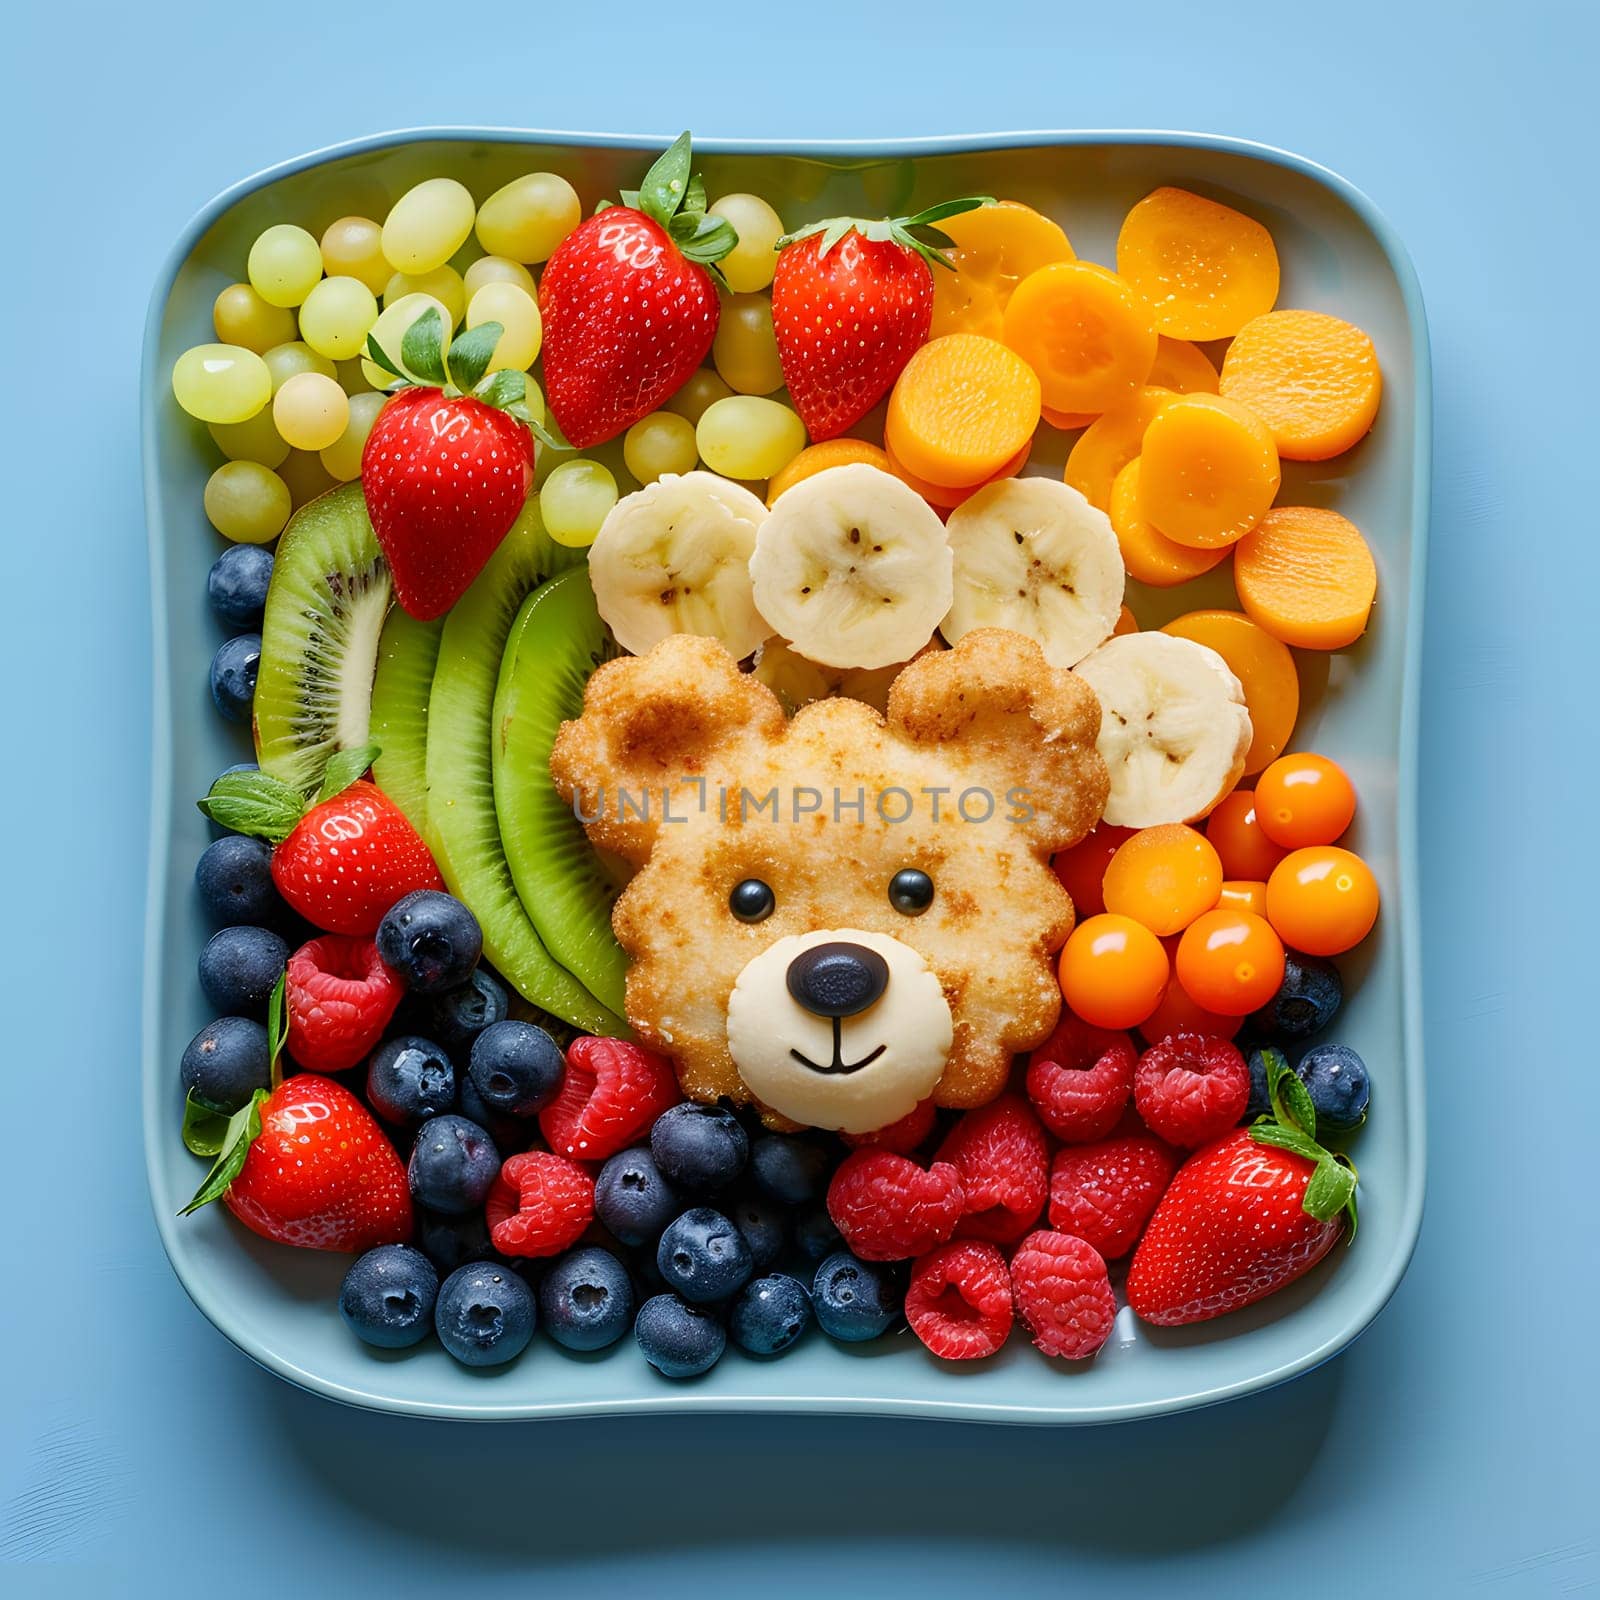 A teddy bear created from fruit and vegetables displayed on a plate by Nadtochiy